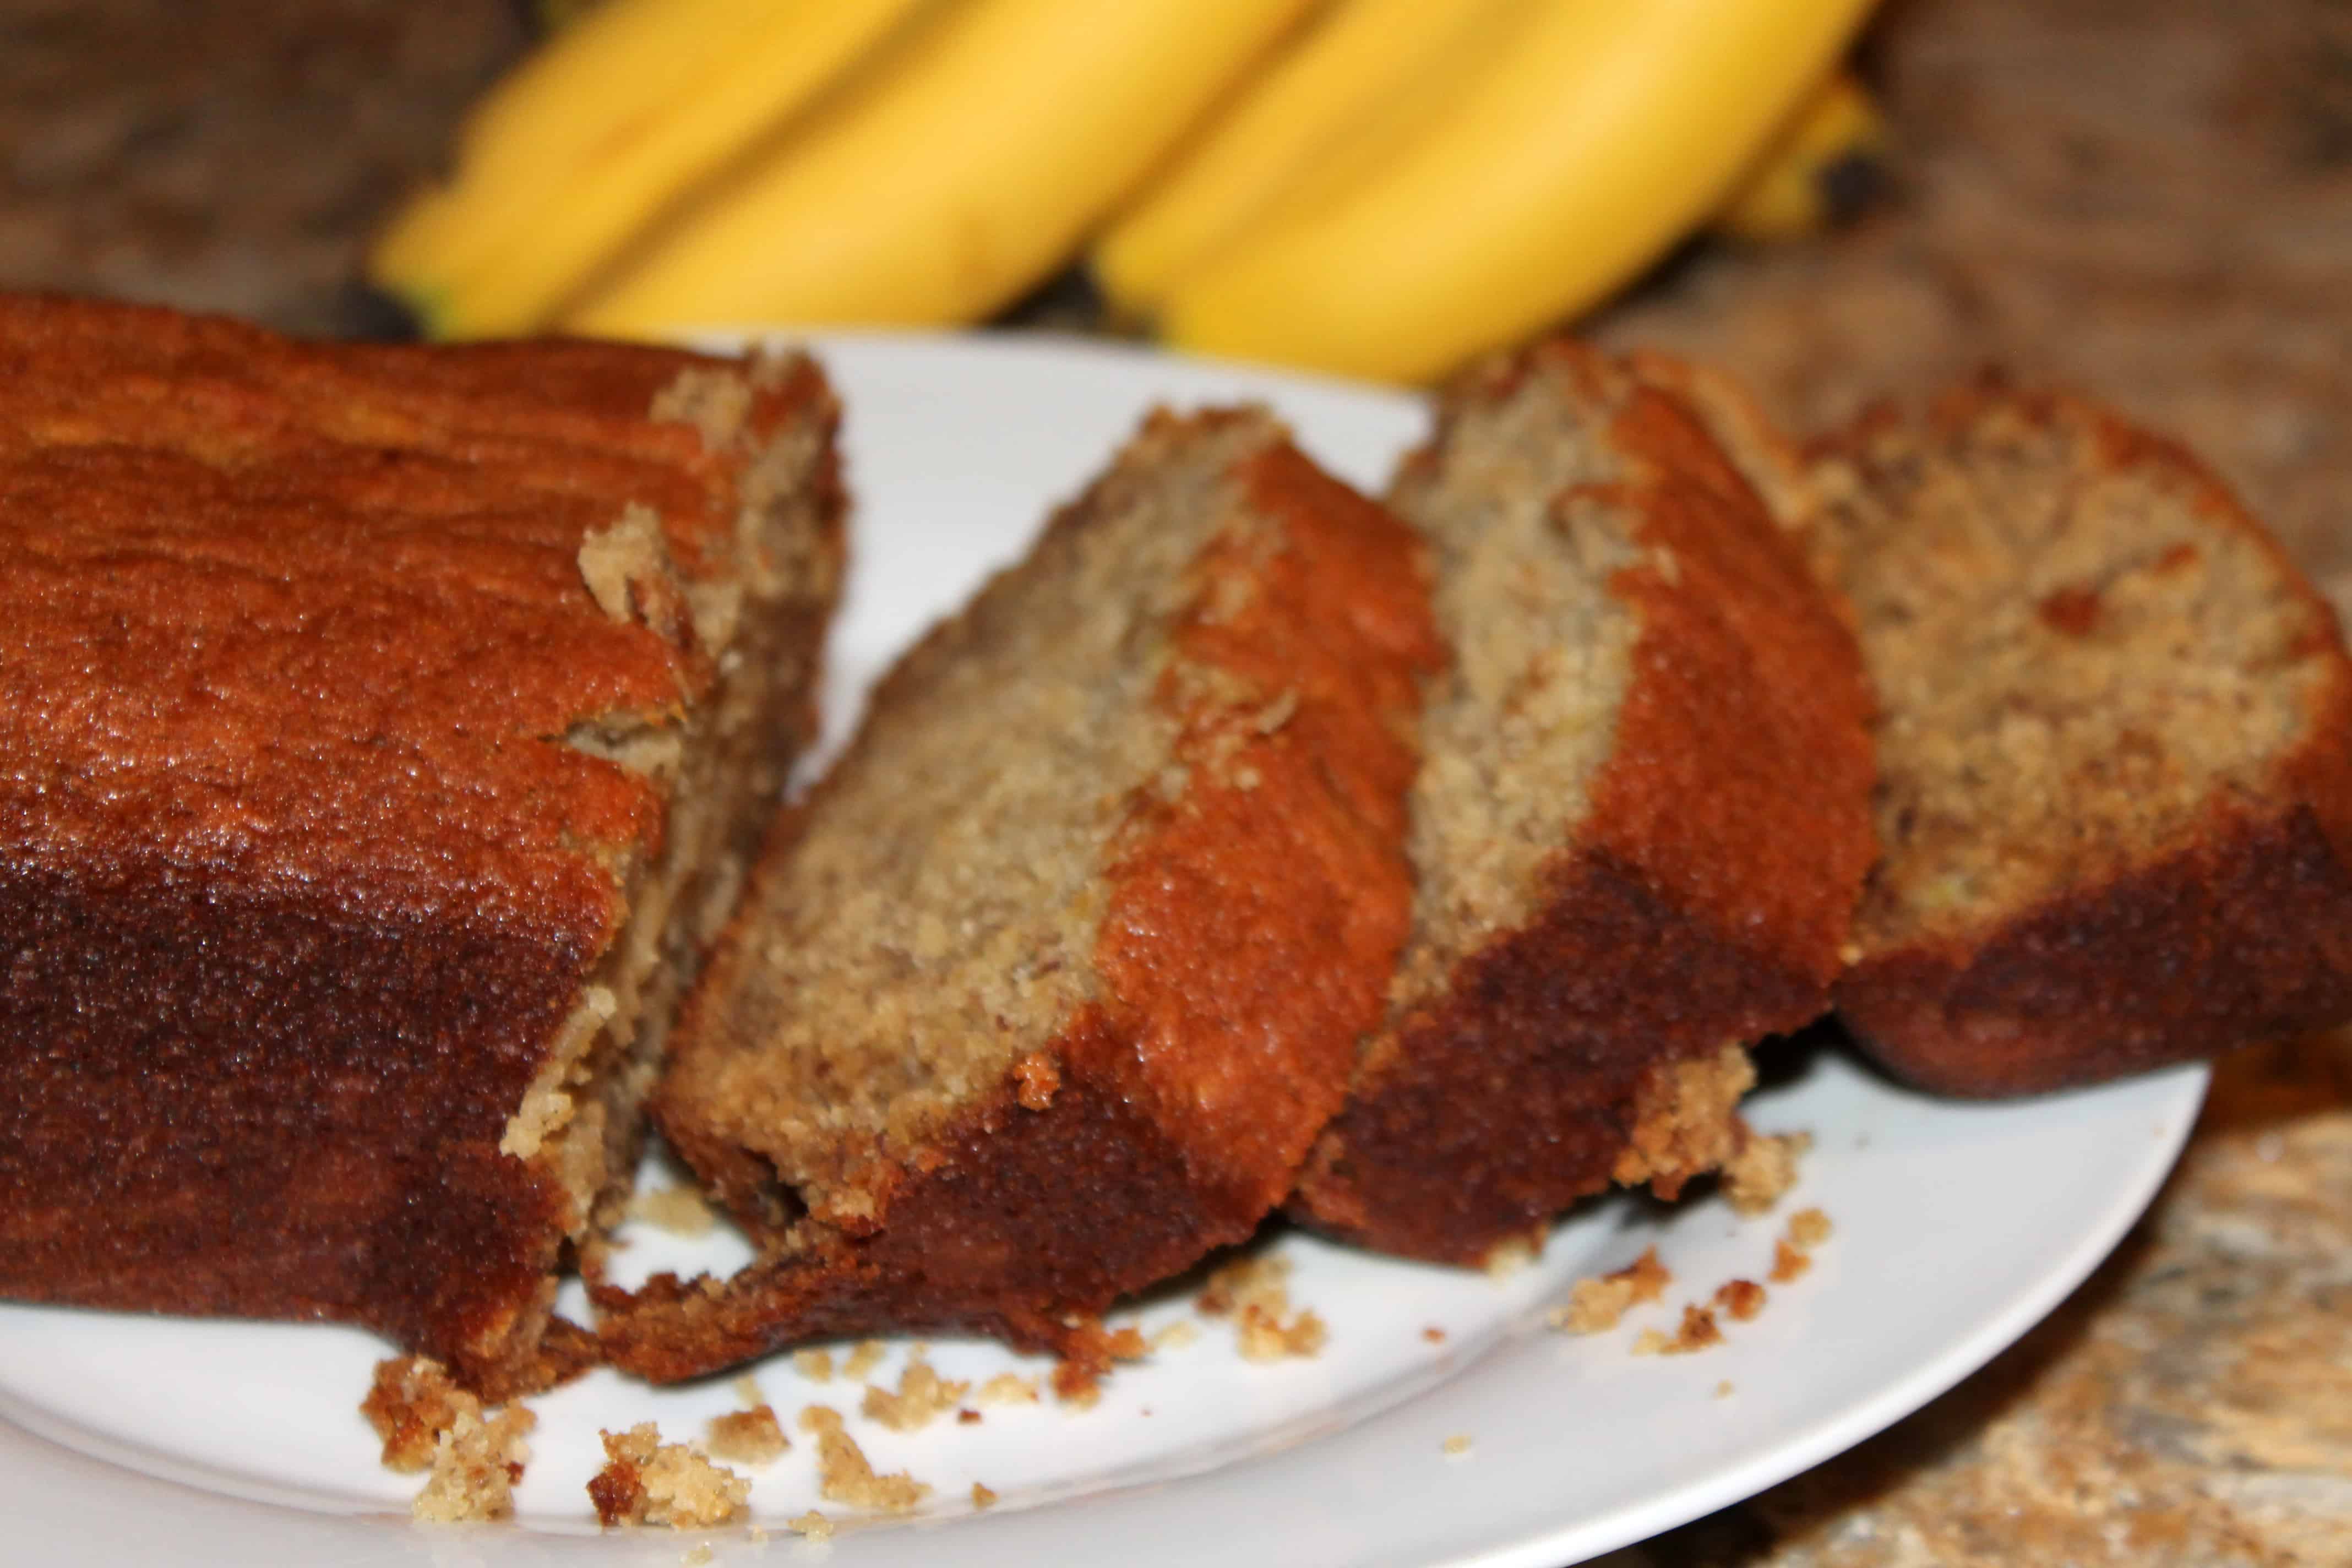 sliced up banana bread on a plate